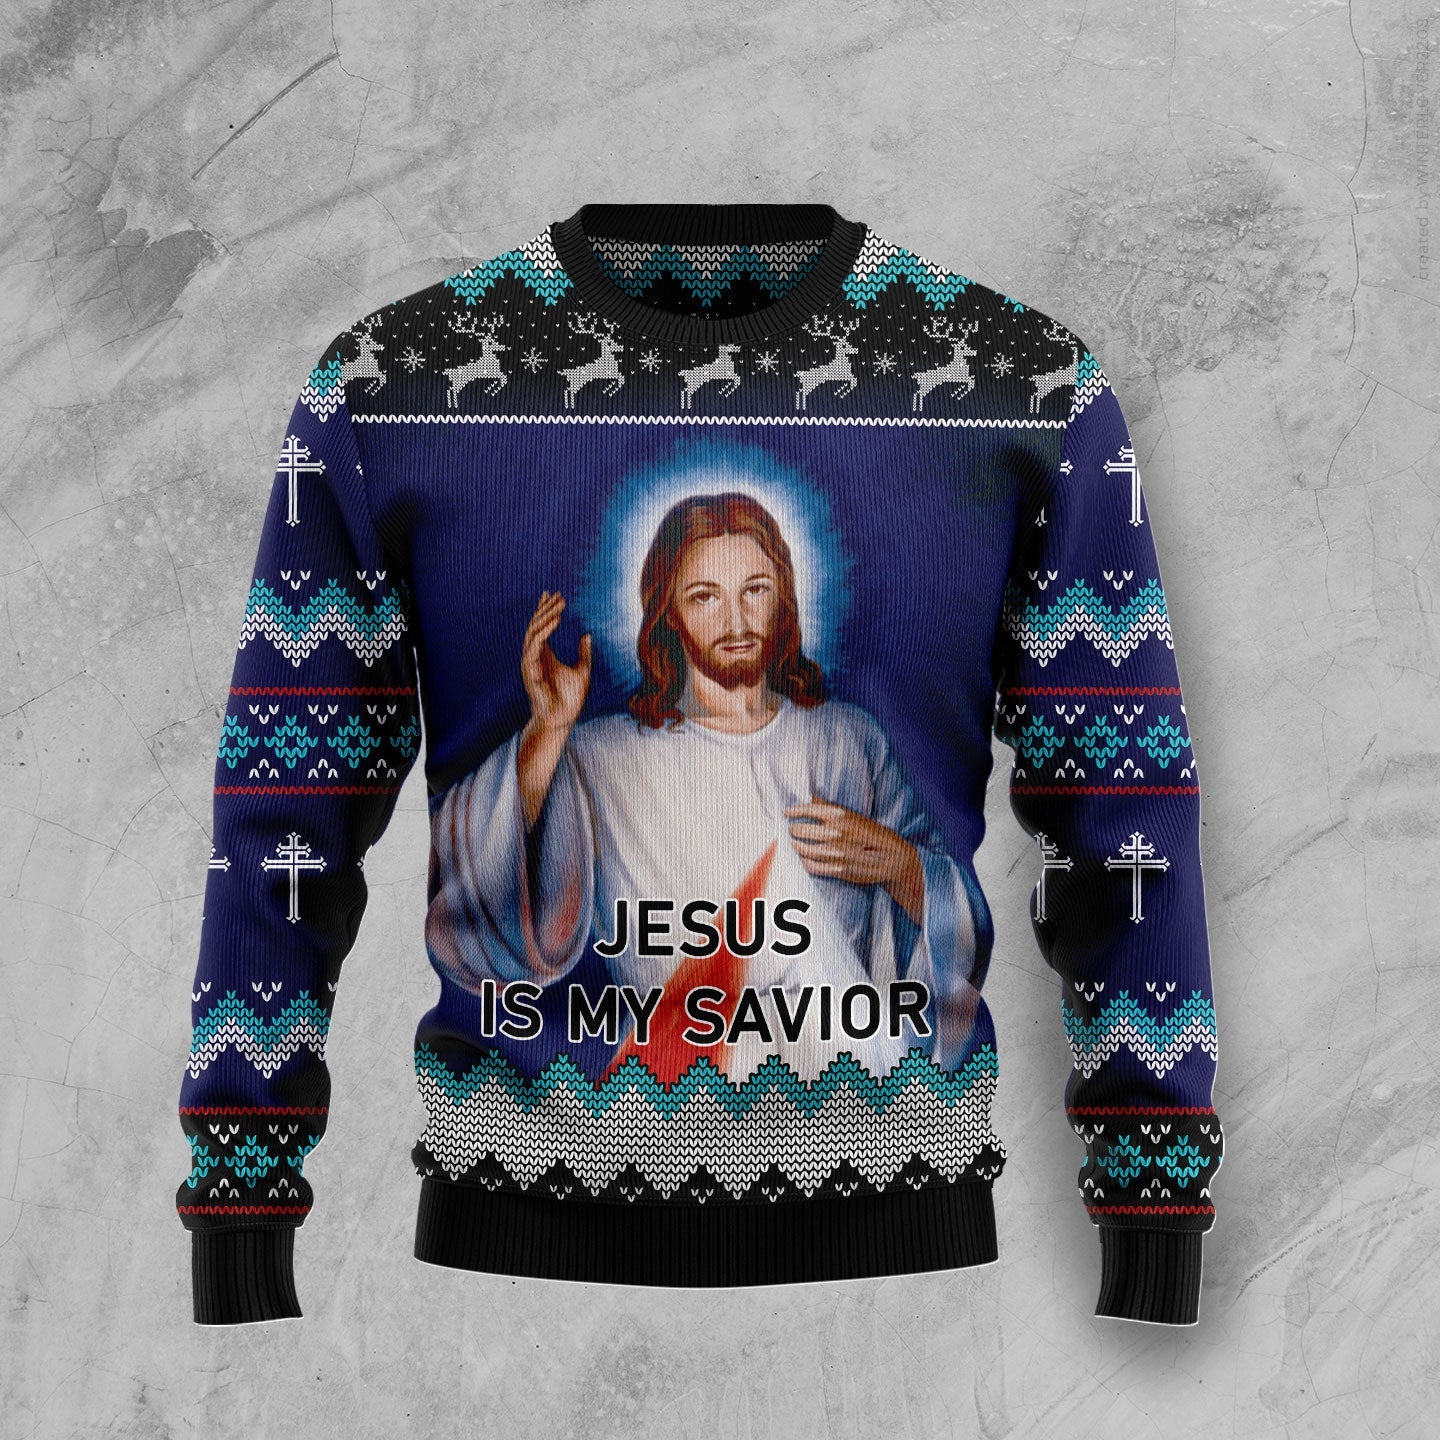 Jesus Is My Savior Ugly Christmas Sweater - Xmas Gifts For Him Or Her - Christmas Gift For Friends - Jesus Christ Sweater